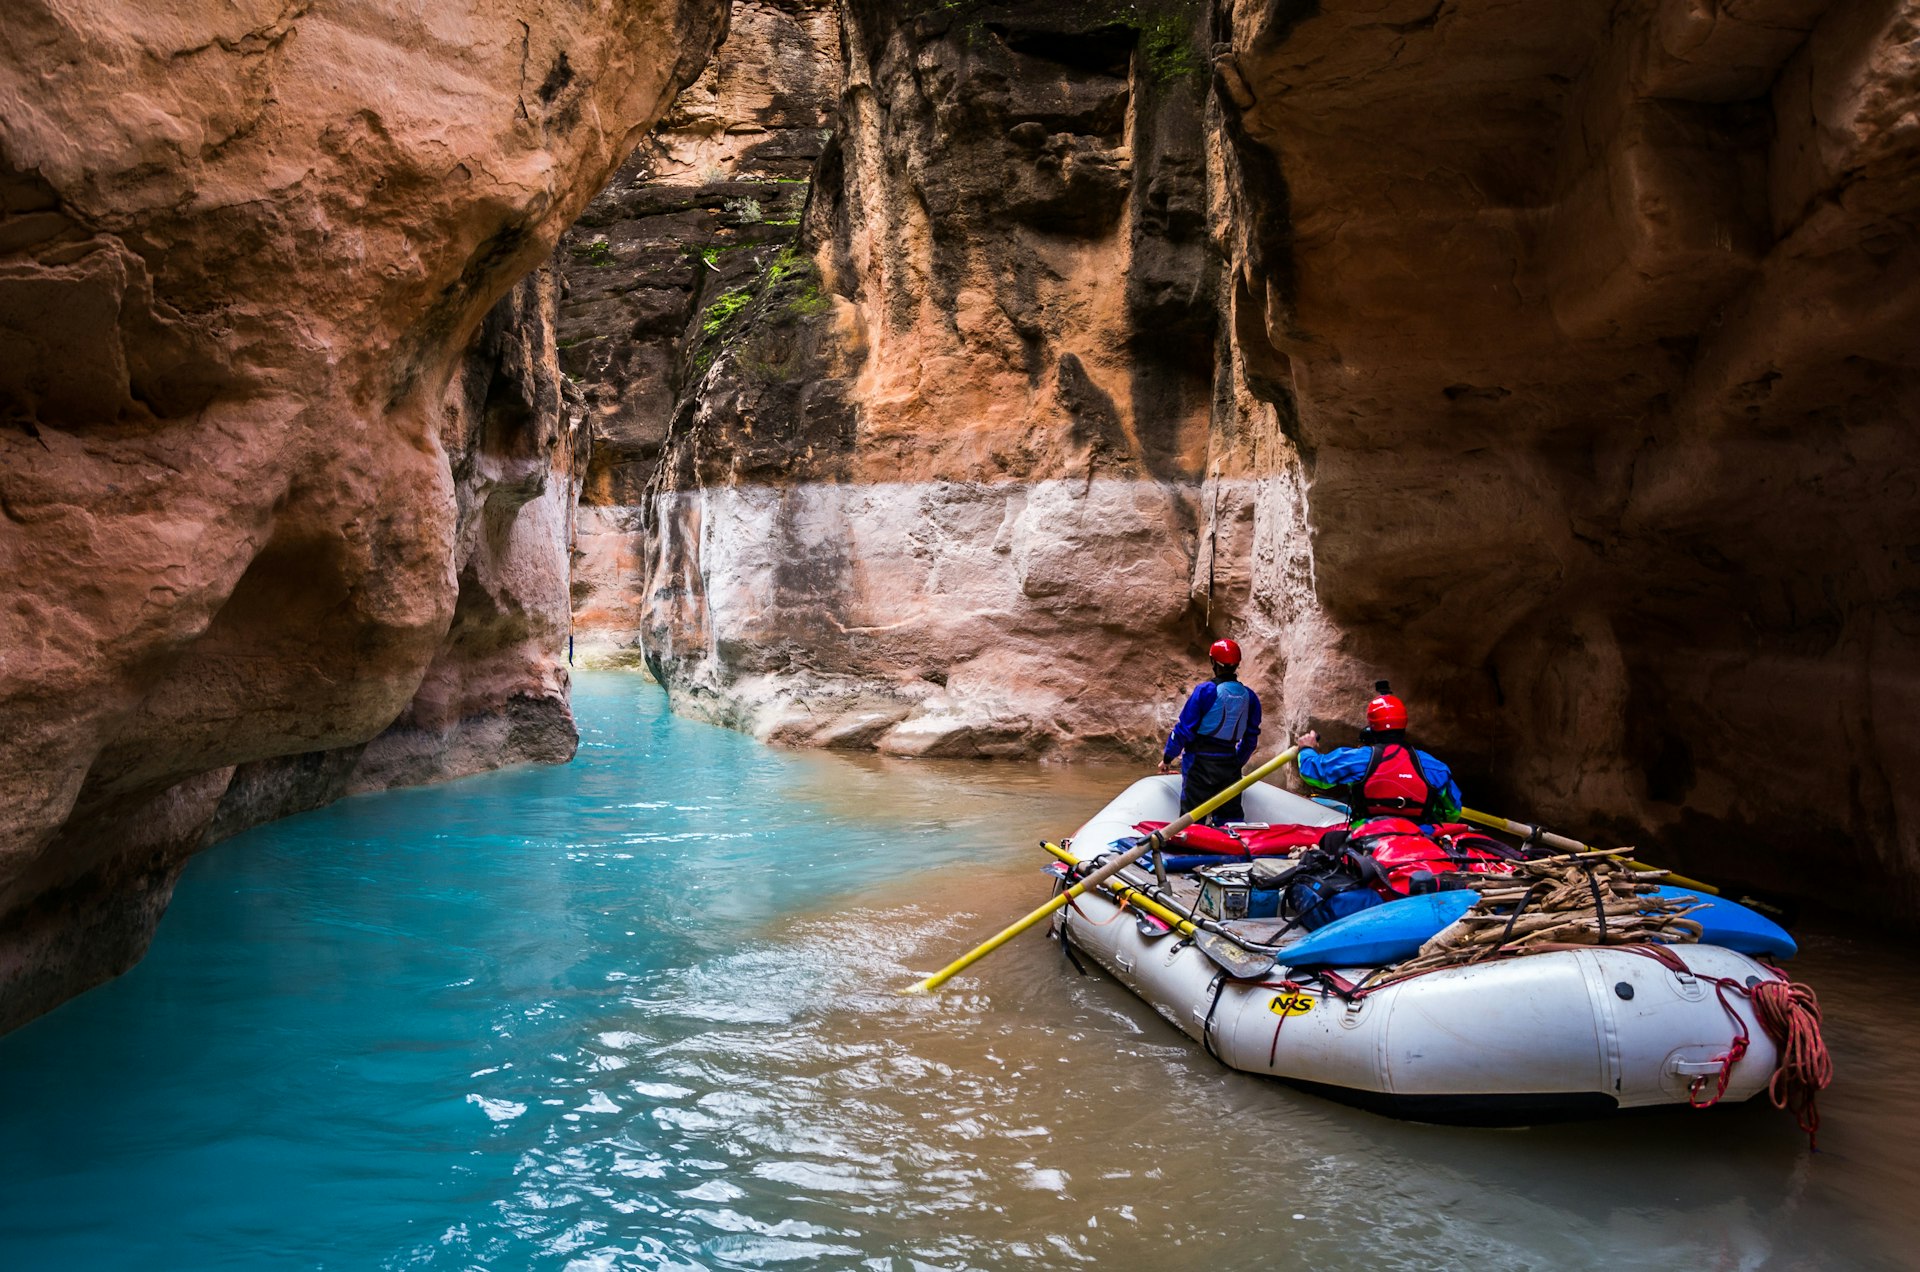 Rafters on a small river in the Grand Canyon